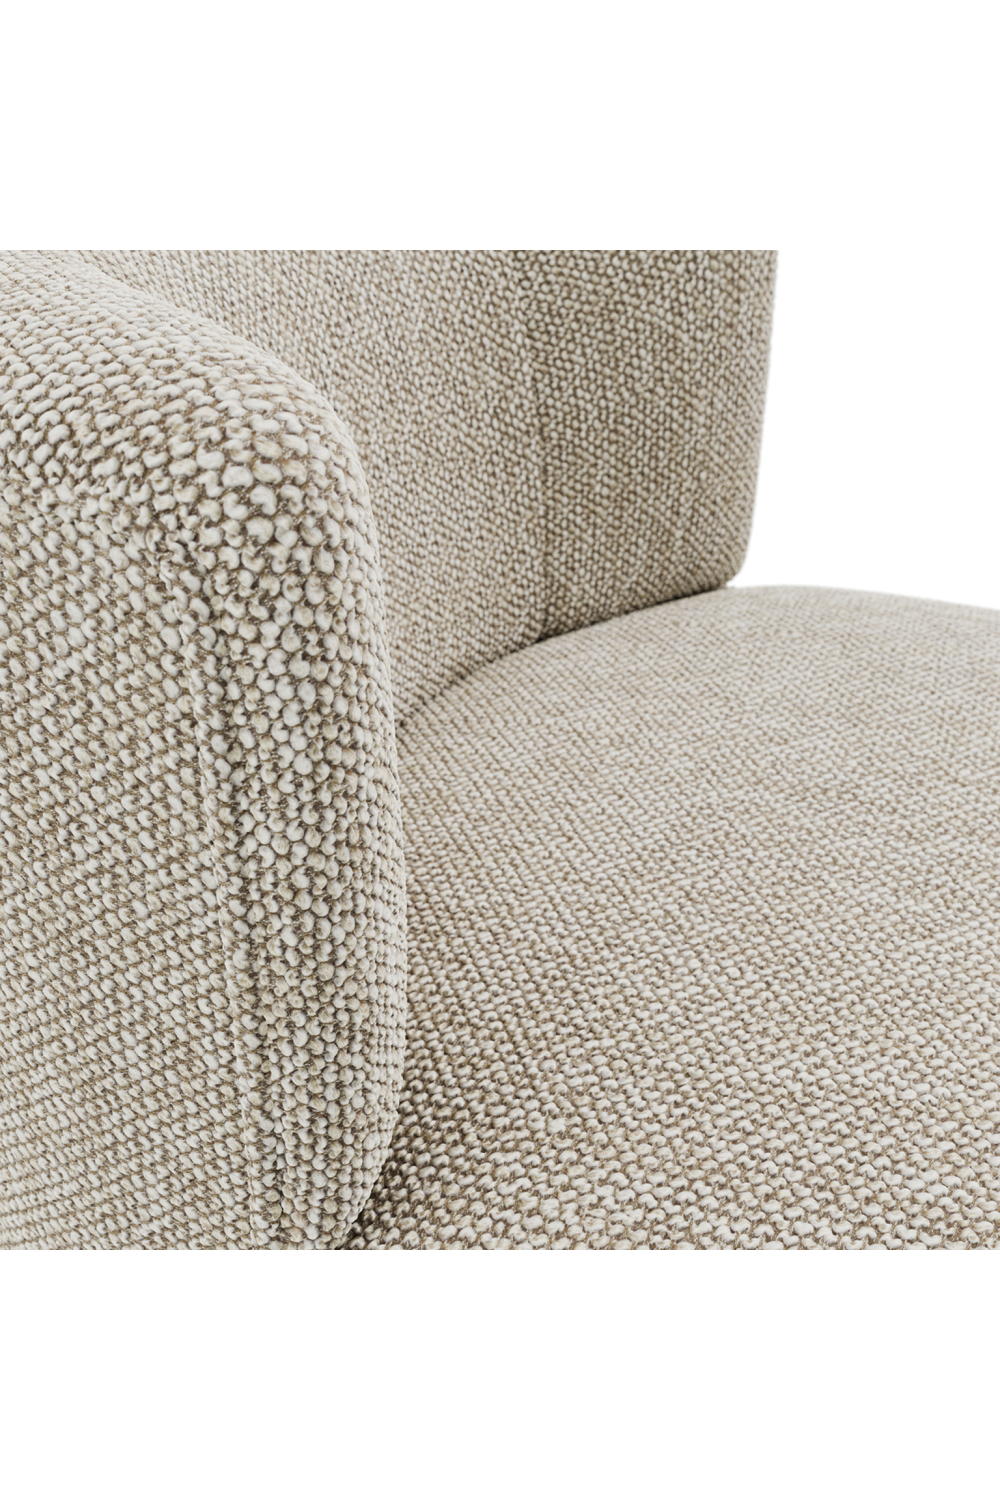 Upholstered One-Seater Sofa | Dome Deco Abel | Oroa.com